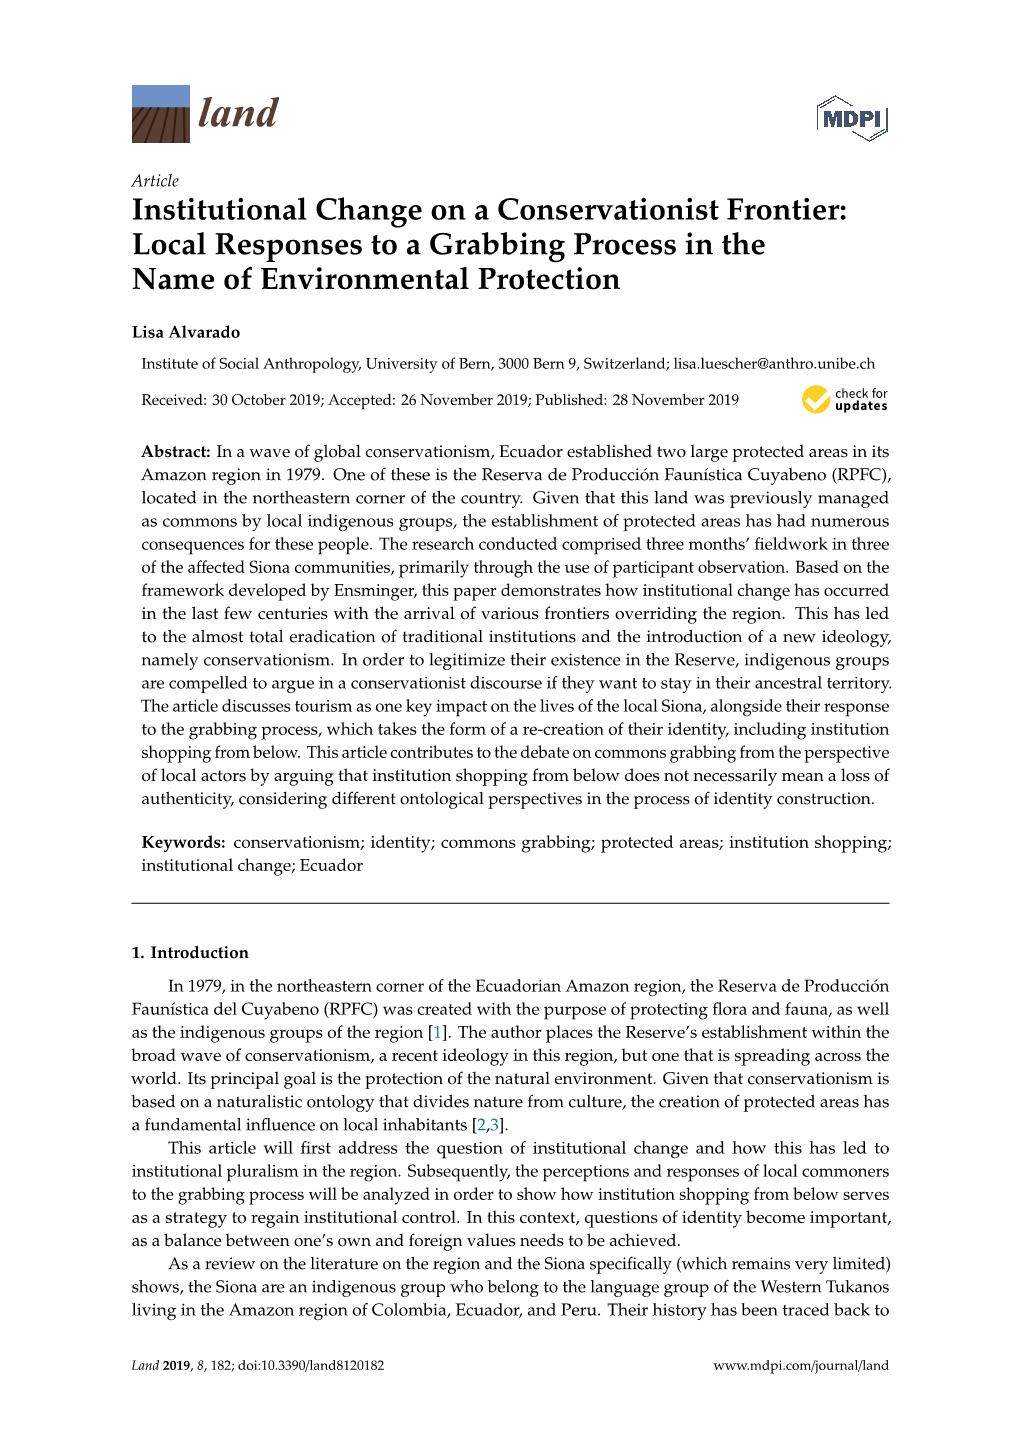 Institutional Change on a Conservationist Frontier: Local Responses to a Grabbing Process in the Name of Environmental Protection